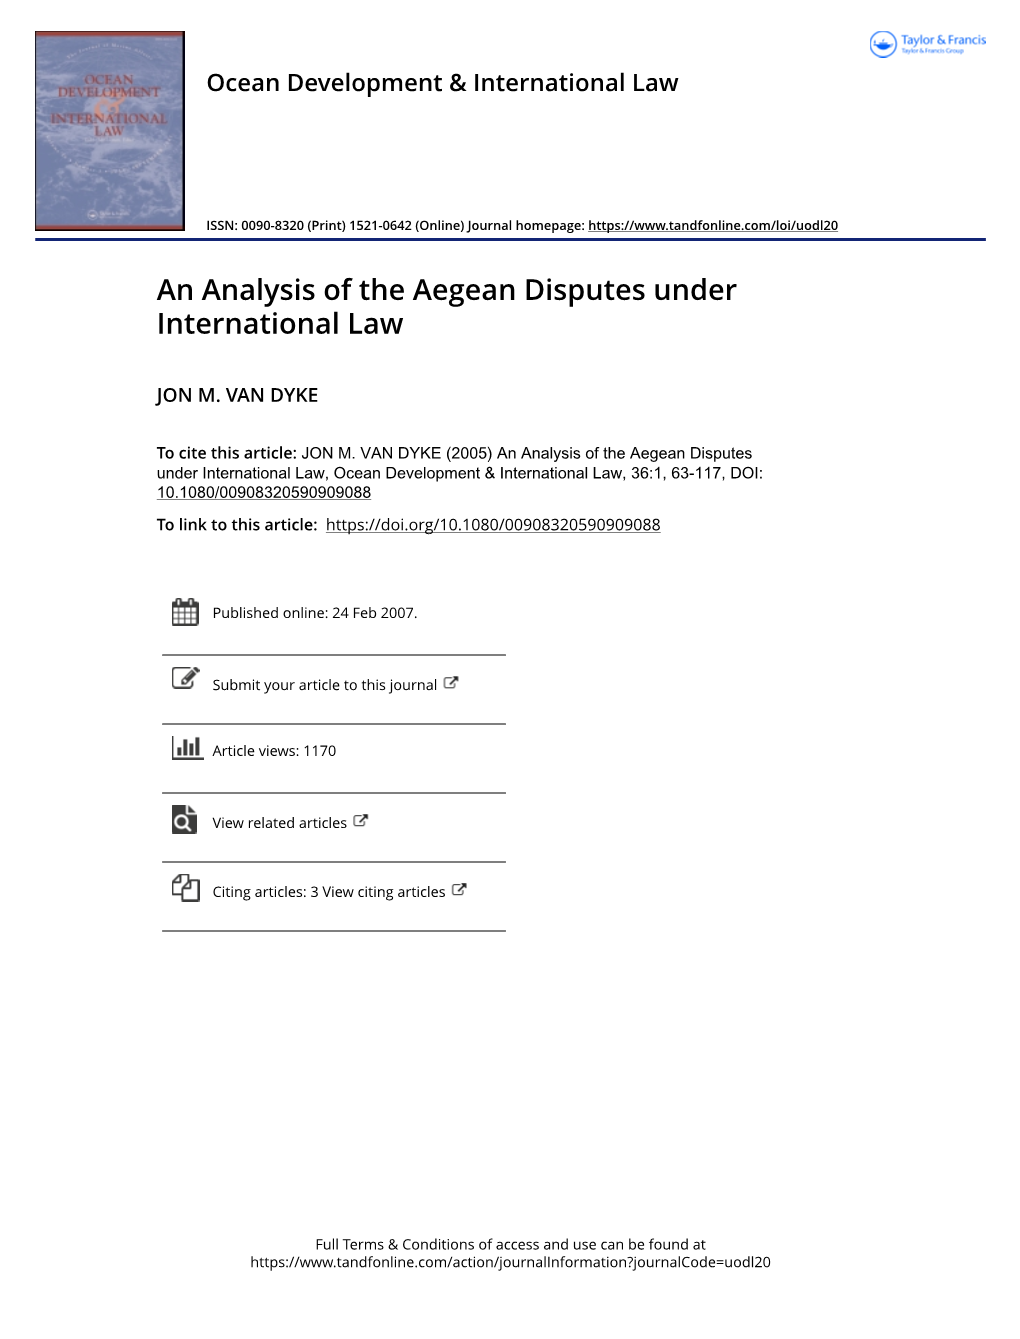 An Analysis of the Aegean Disputes Under International Law